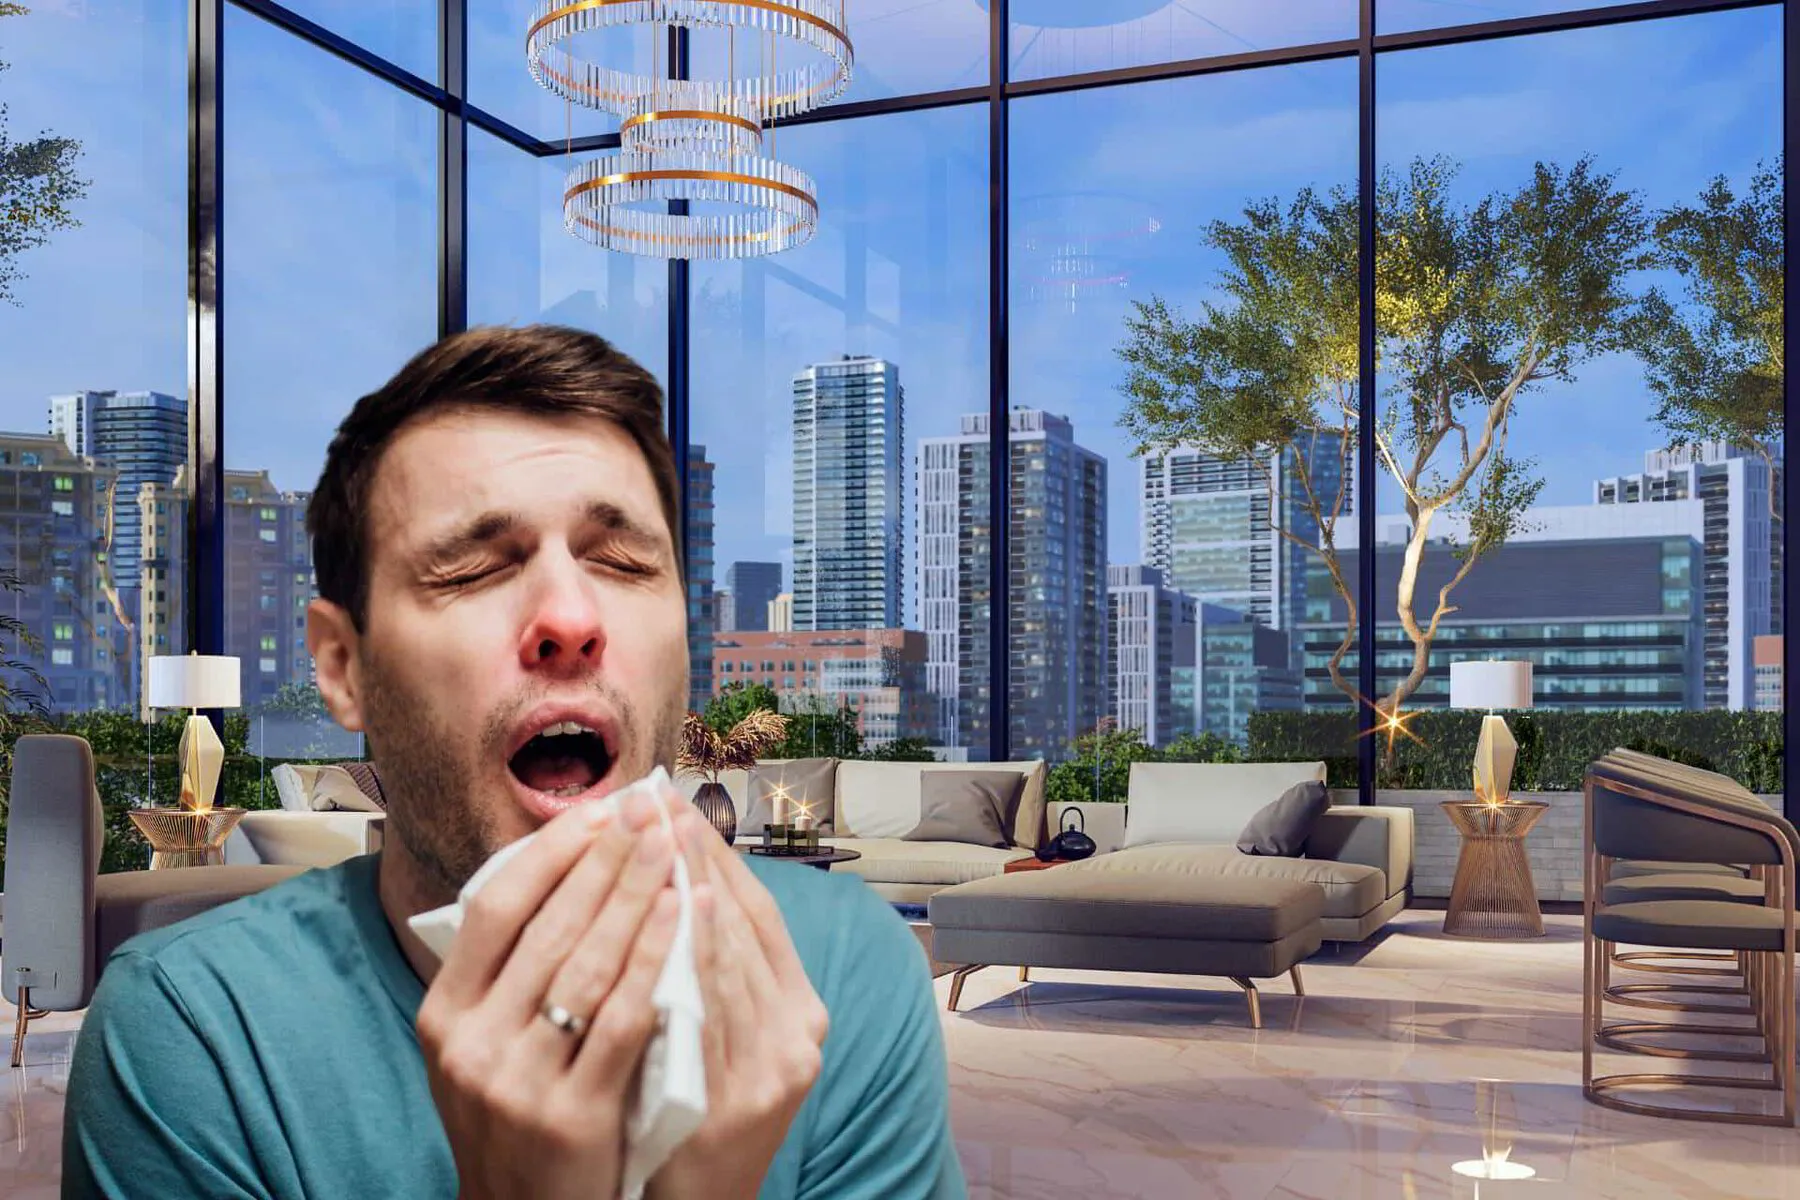 man sneezing in his modern apartment from poor IAQ